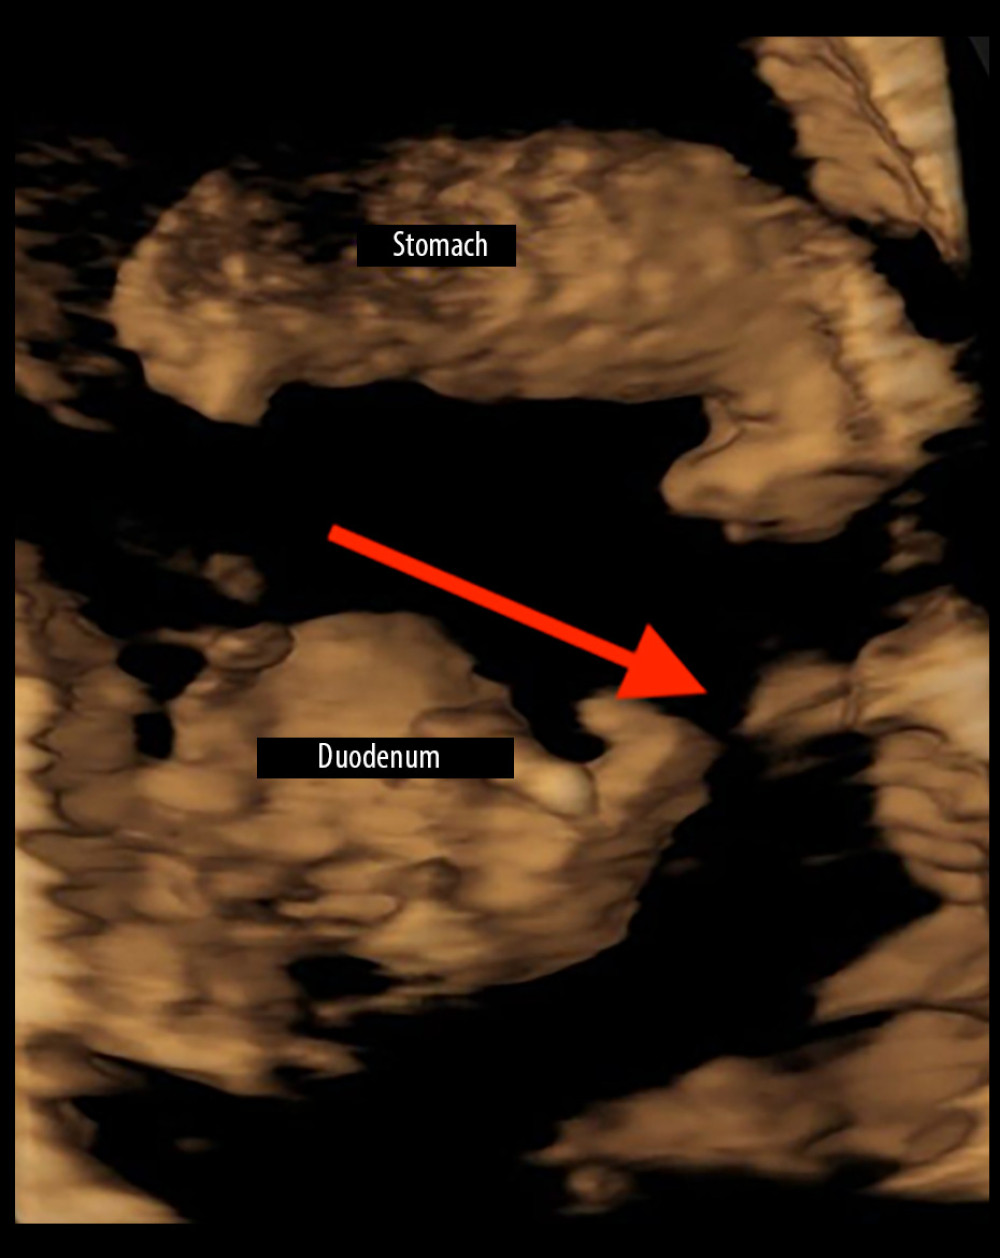 HDlive inversion image. Bloated stomach, duodenum are visible. Duodenum stenosis and bloated stomach are indicated by red arrow.